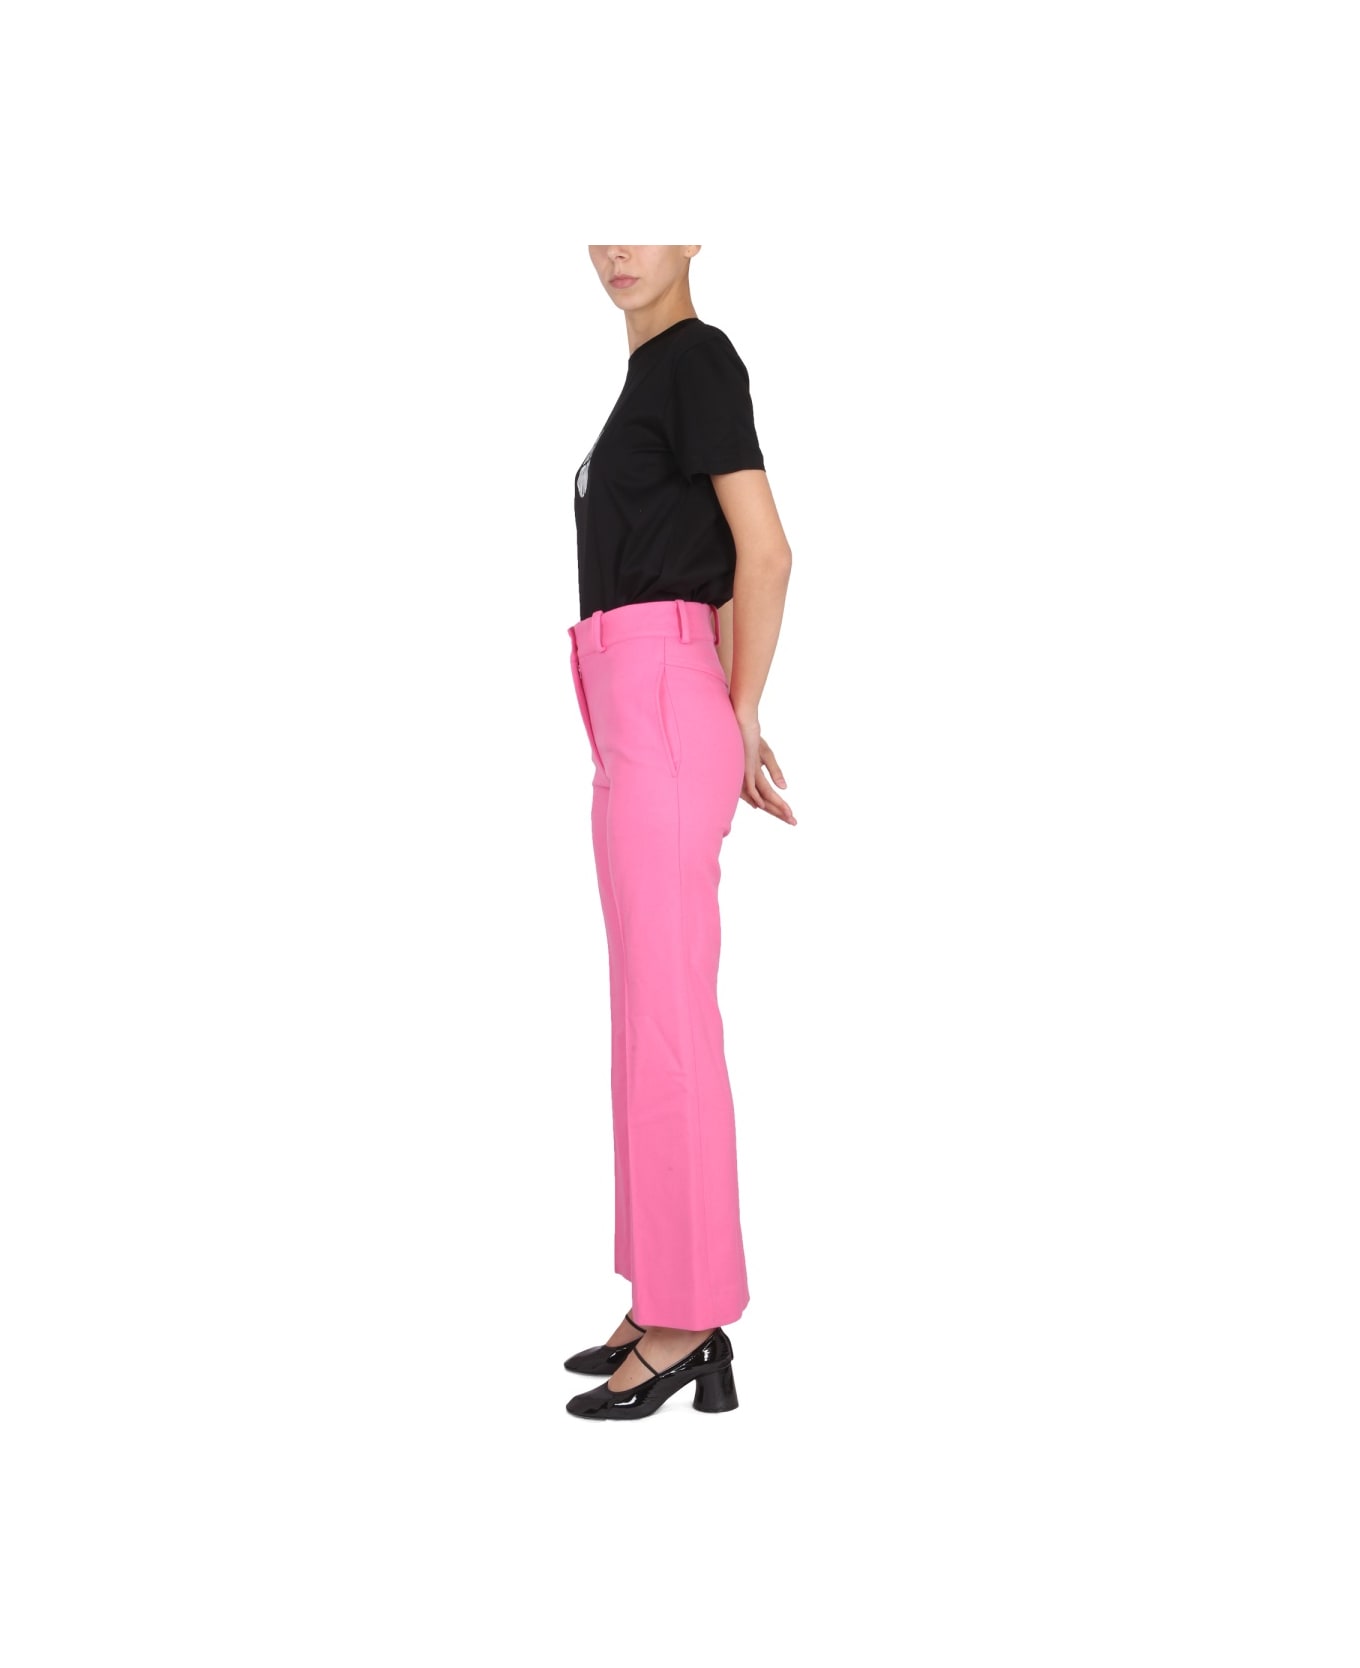 Patou Bell Bottoms - PINK